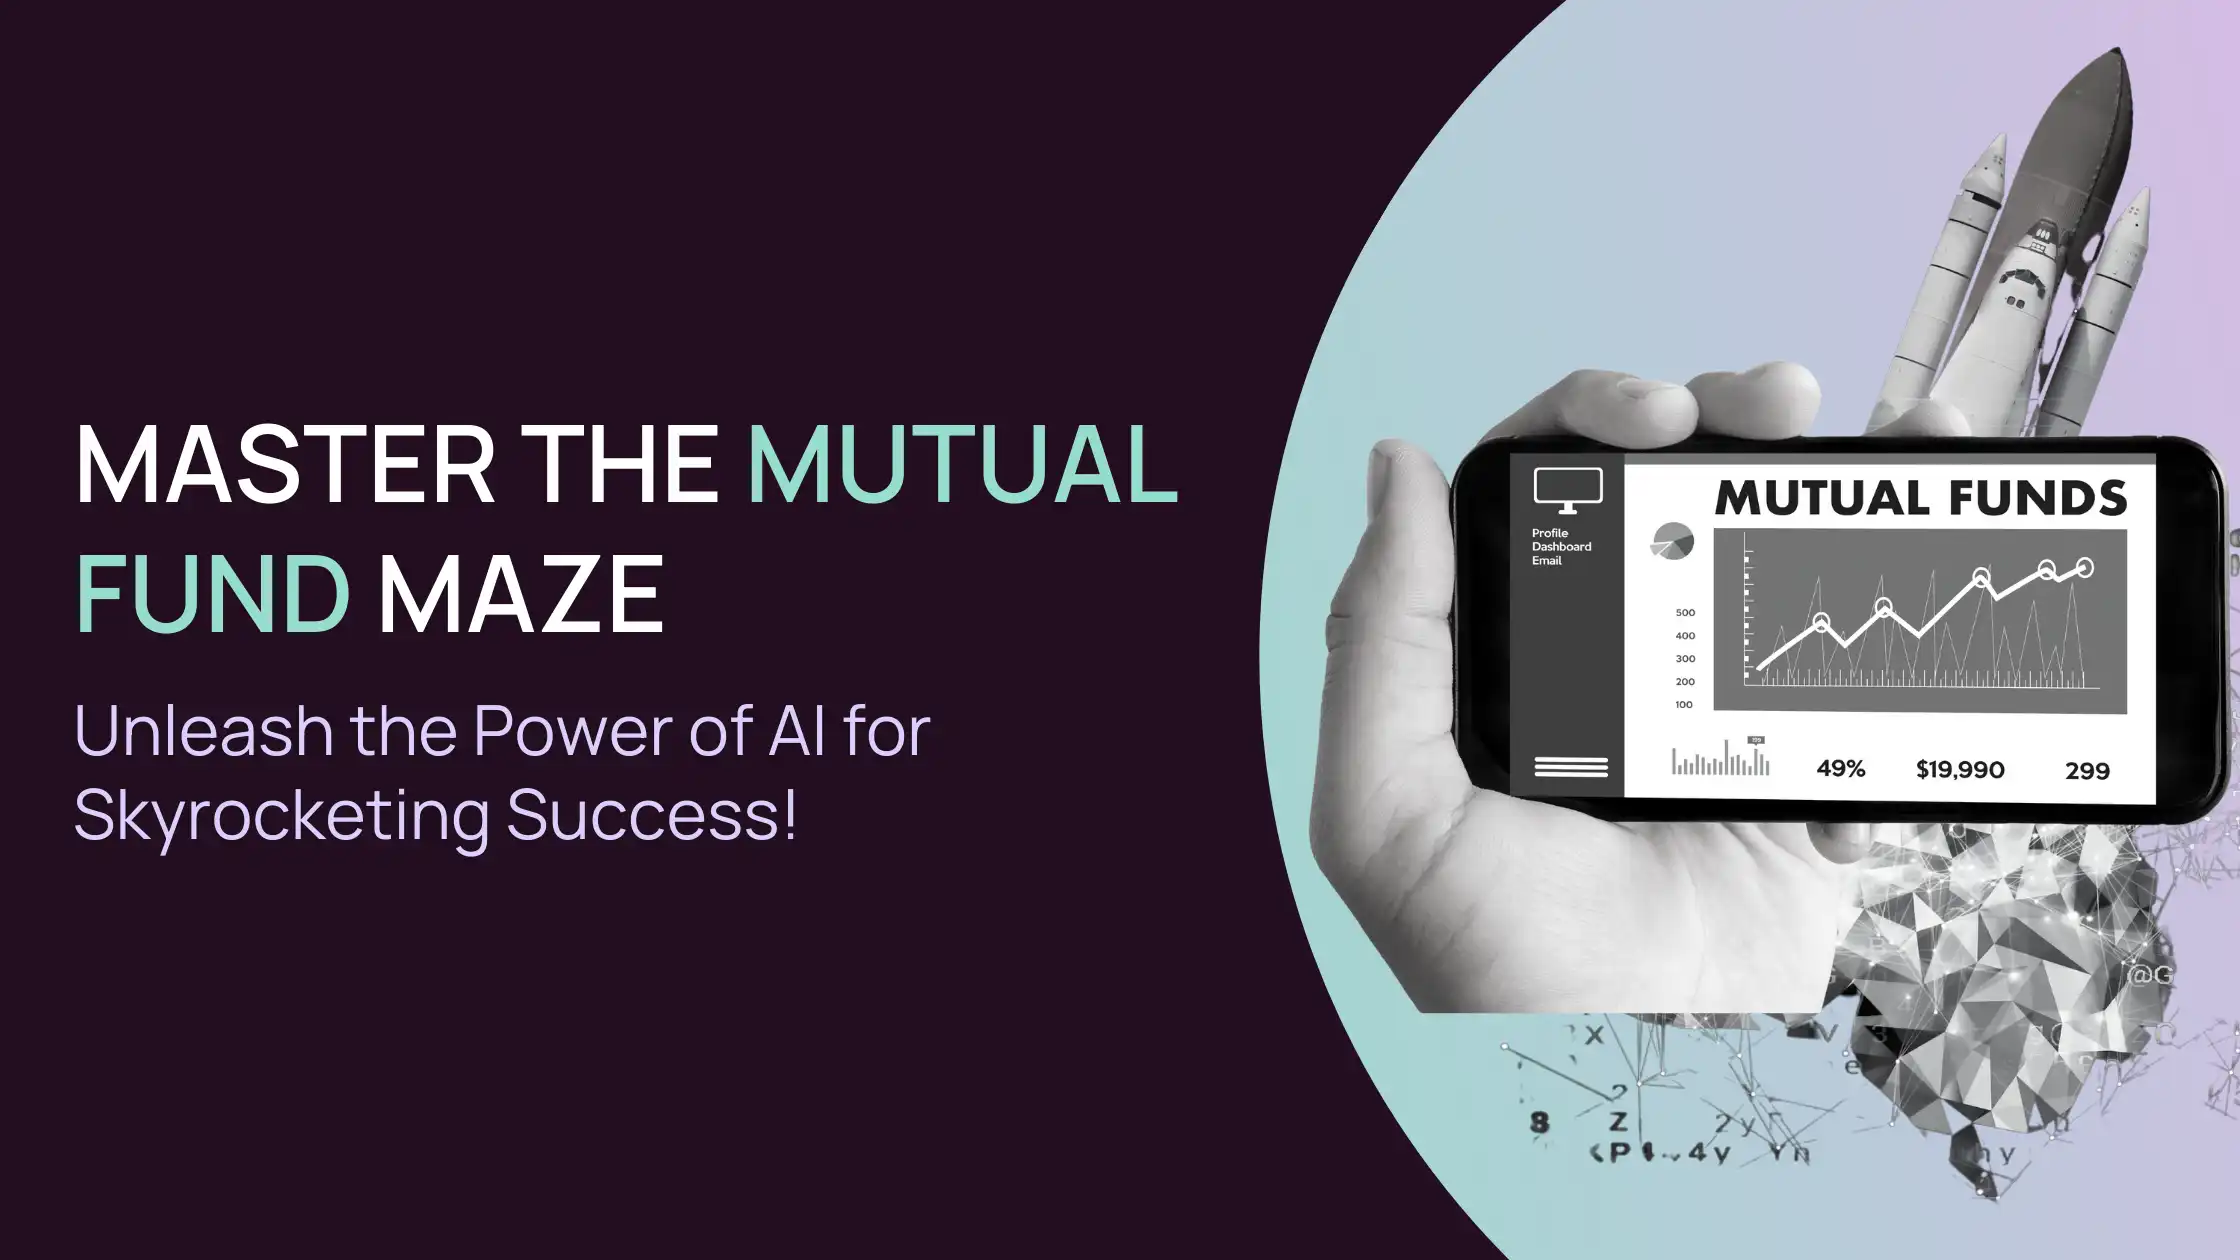 Master the Mutual Fund Maze: Unleash the Power of AI for Skyrocketing Success!